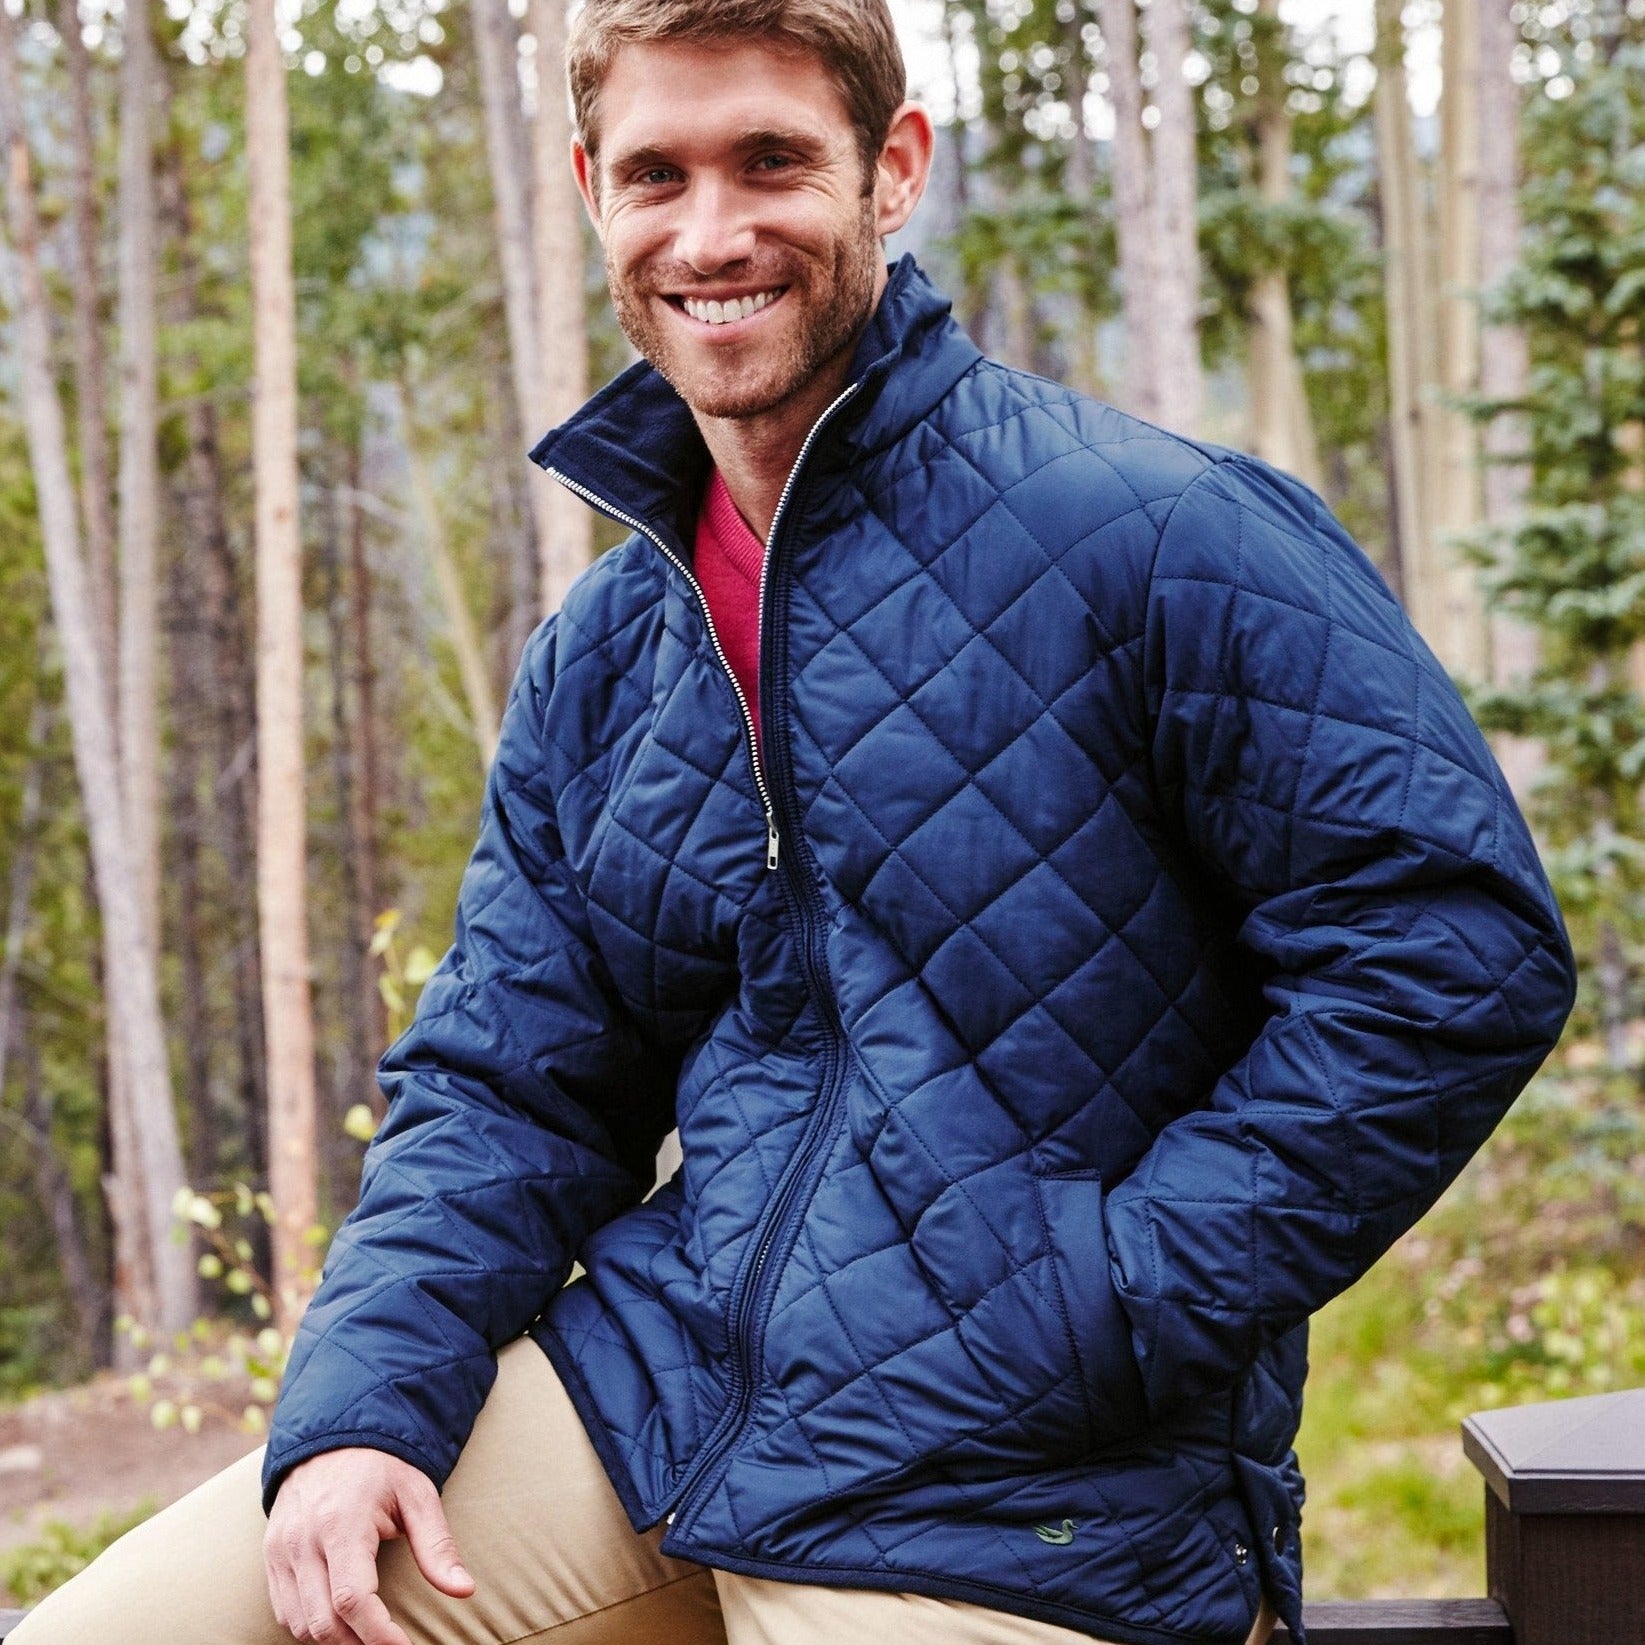 Quilted Jackets - Menswear